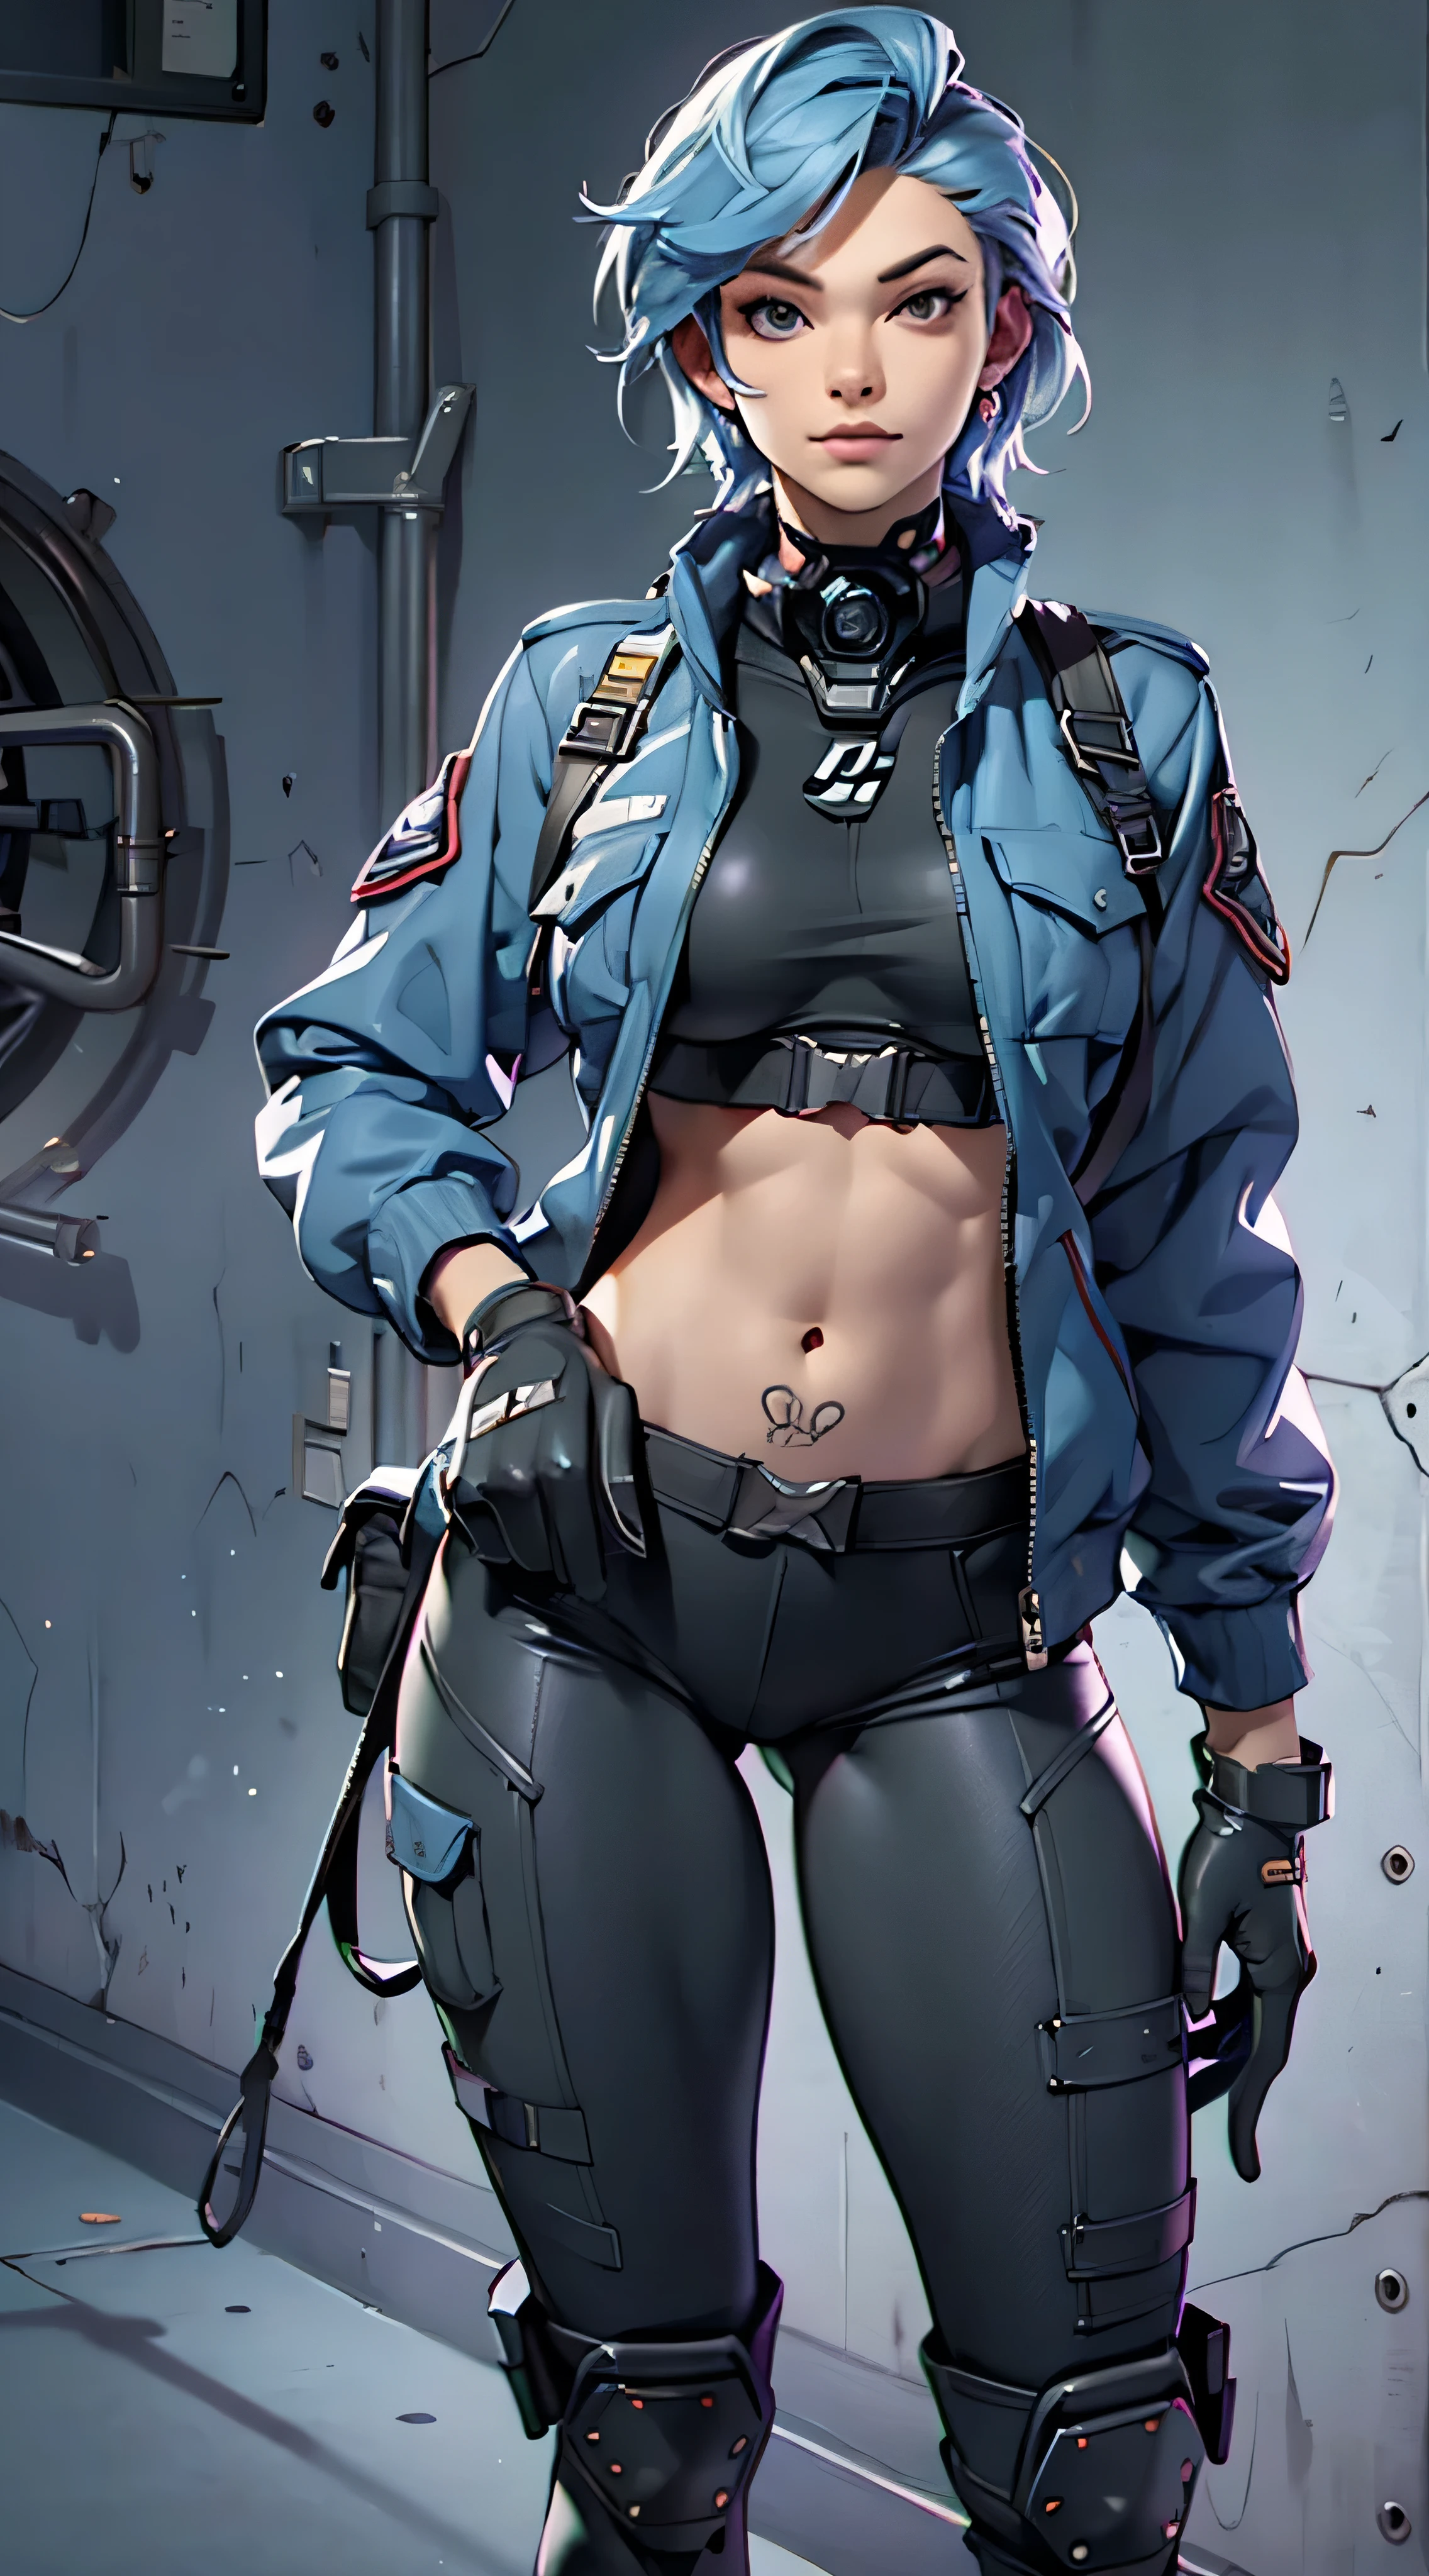 11:23(((Best quality: 1.4))),(Unbeatable masterpiece), (hyper HD),(Hyper-realistic 8k CG)、（one hand on hip gesture），（lightblue hair） ((( body))), (((1 girl in))), 25-year-old American soldier with perfect body,,Beautiful and well groomed face,muscular body:1.2,Solid royal blue jacket with details, (Pictures from head to thighs)， Complex equipment, purpleish color，long trousers，The clothes inside are dark，Clothes with armored metal electronic parts, Poison tattoos )